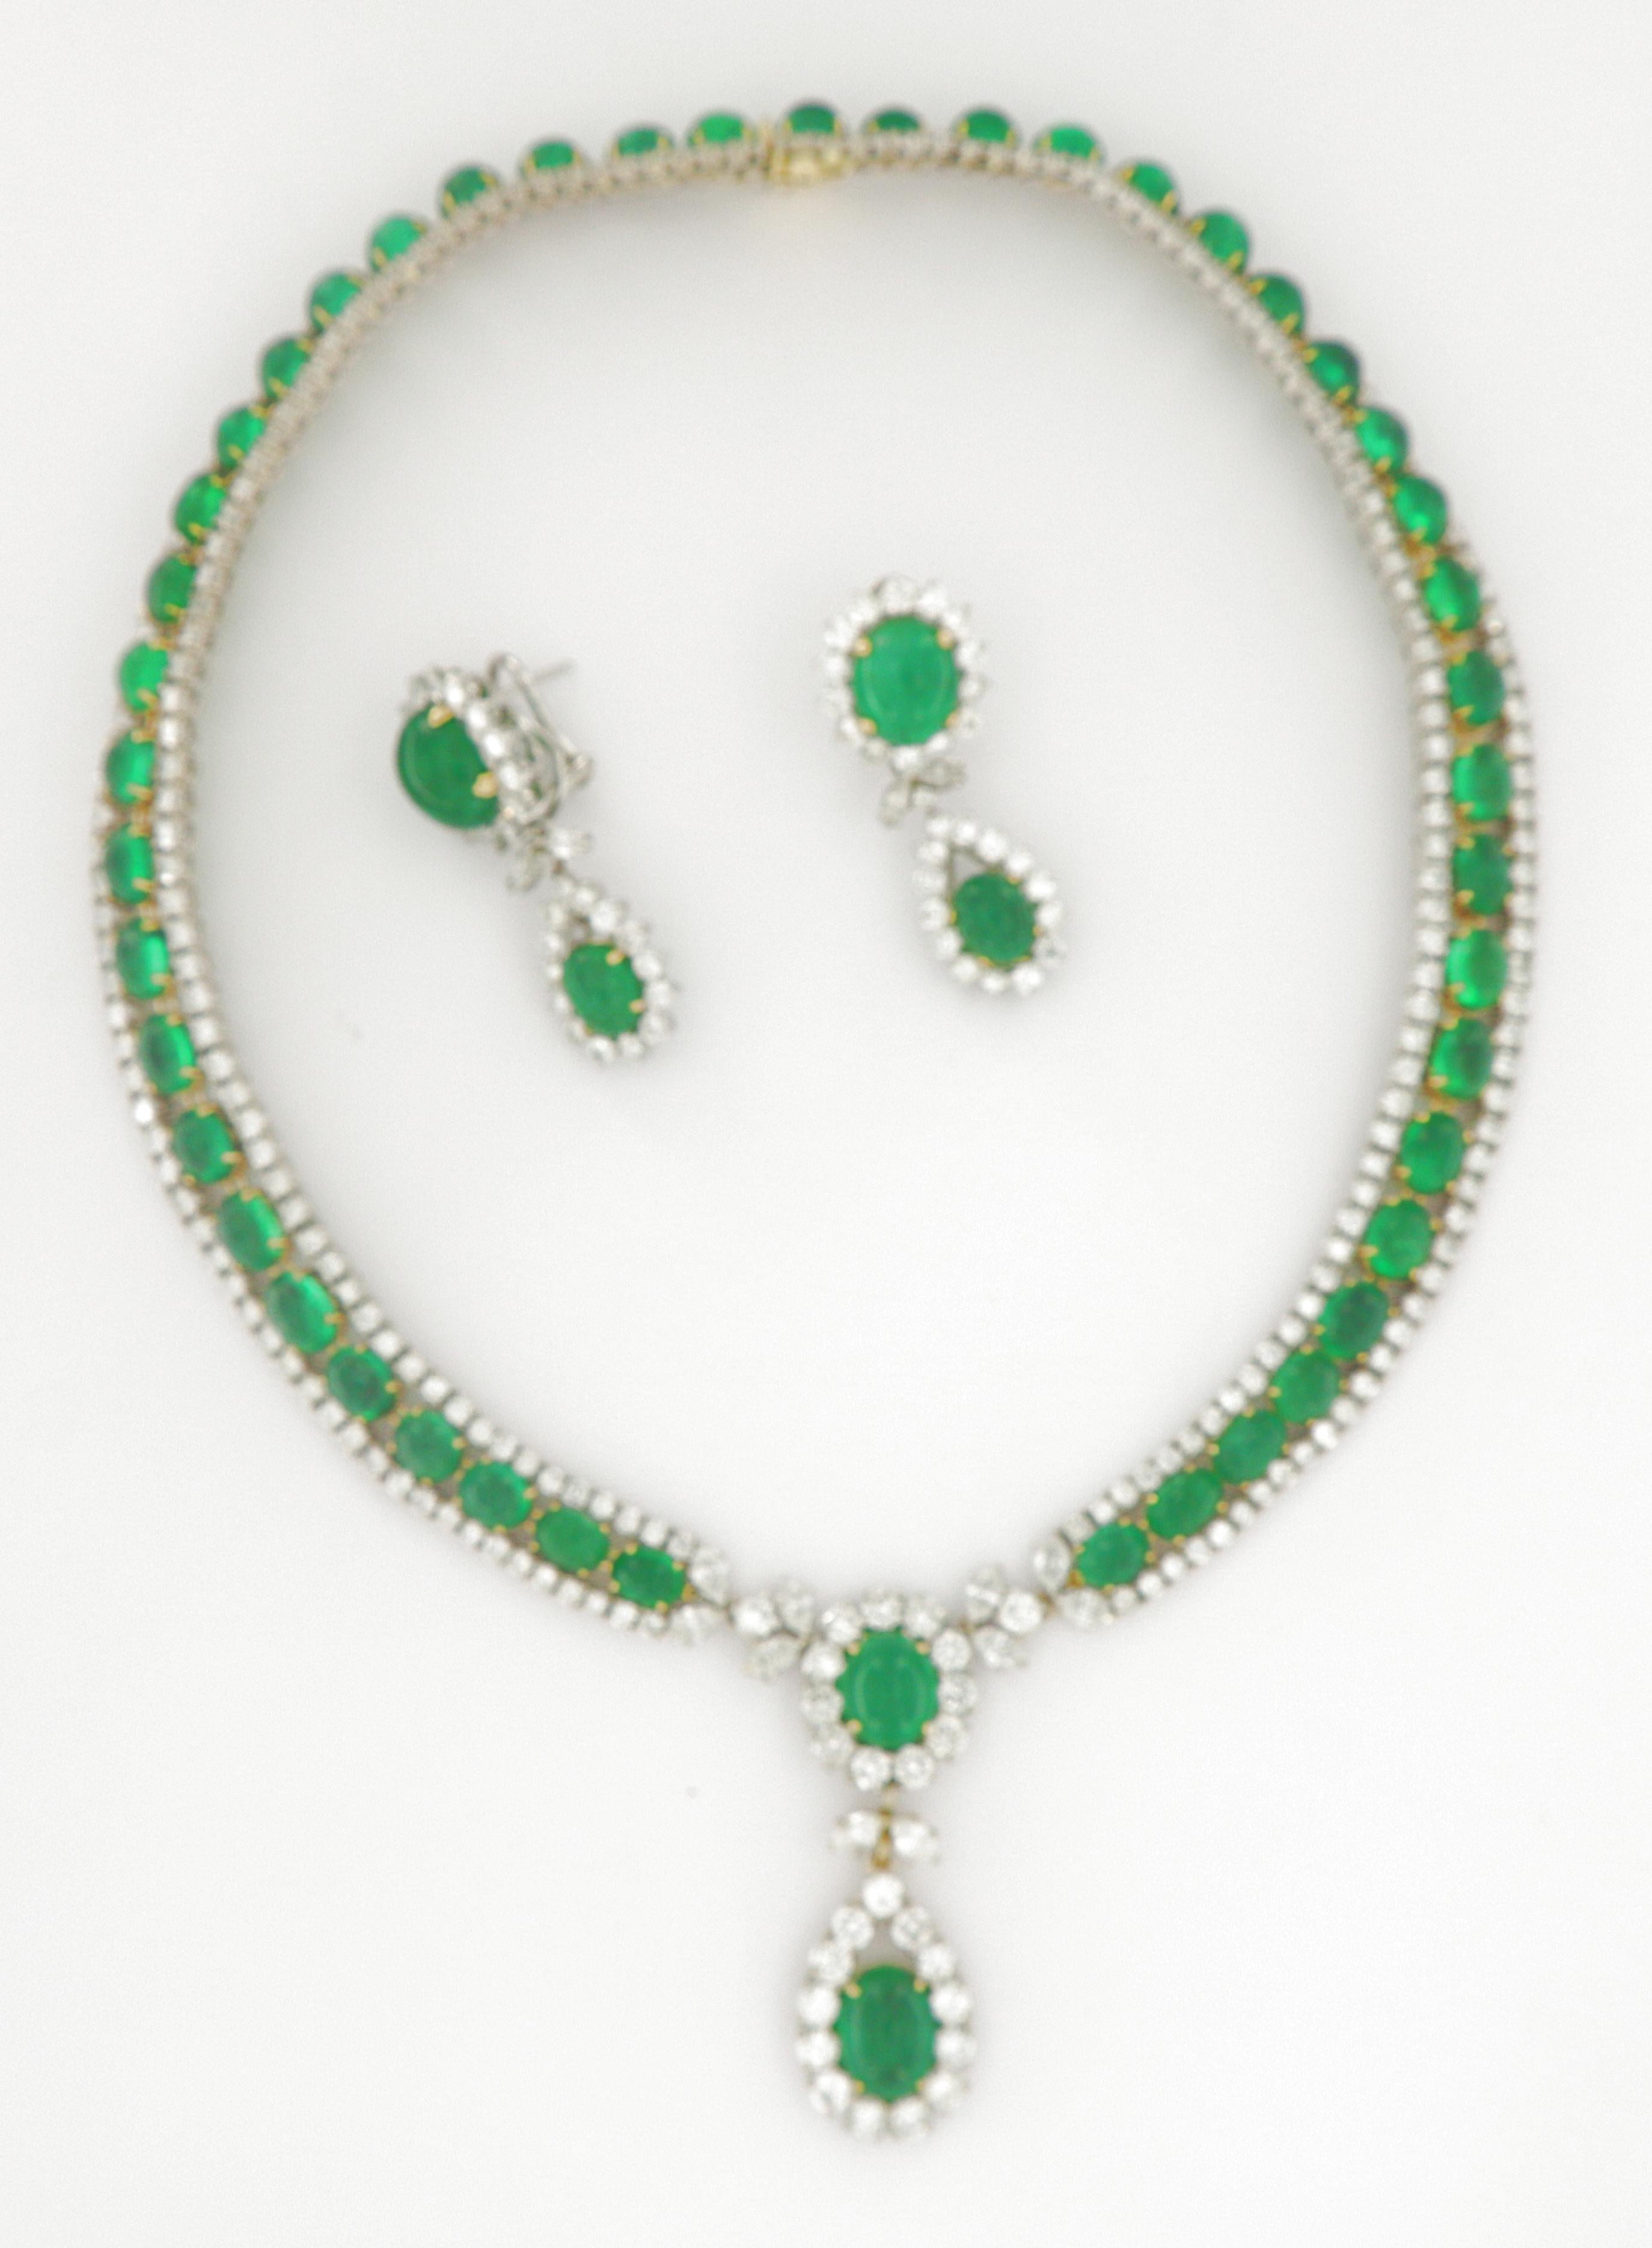 Vintage 125 Carat Russian Emeralds and Diamonds Necklace and Earring Circa 1960  4